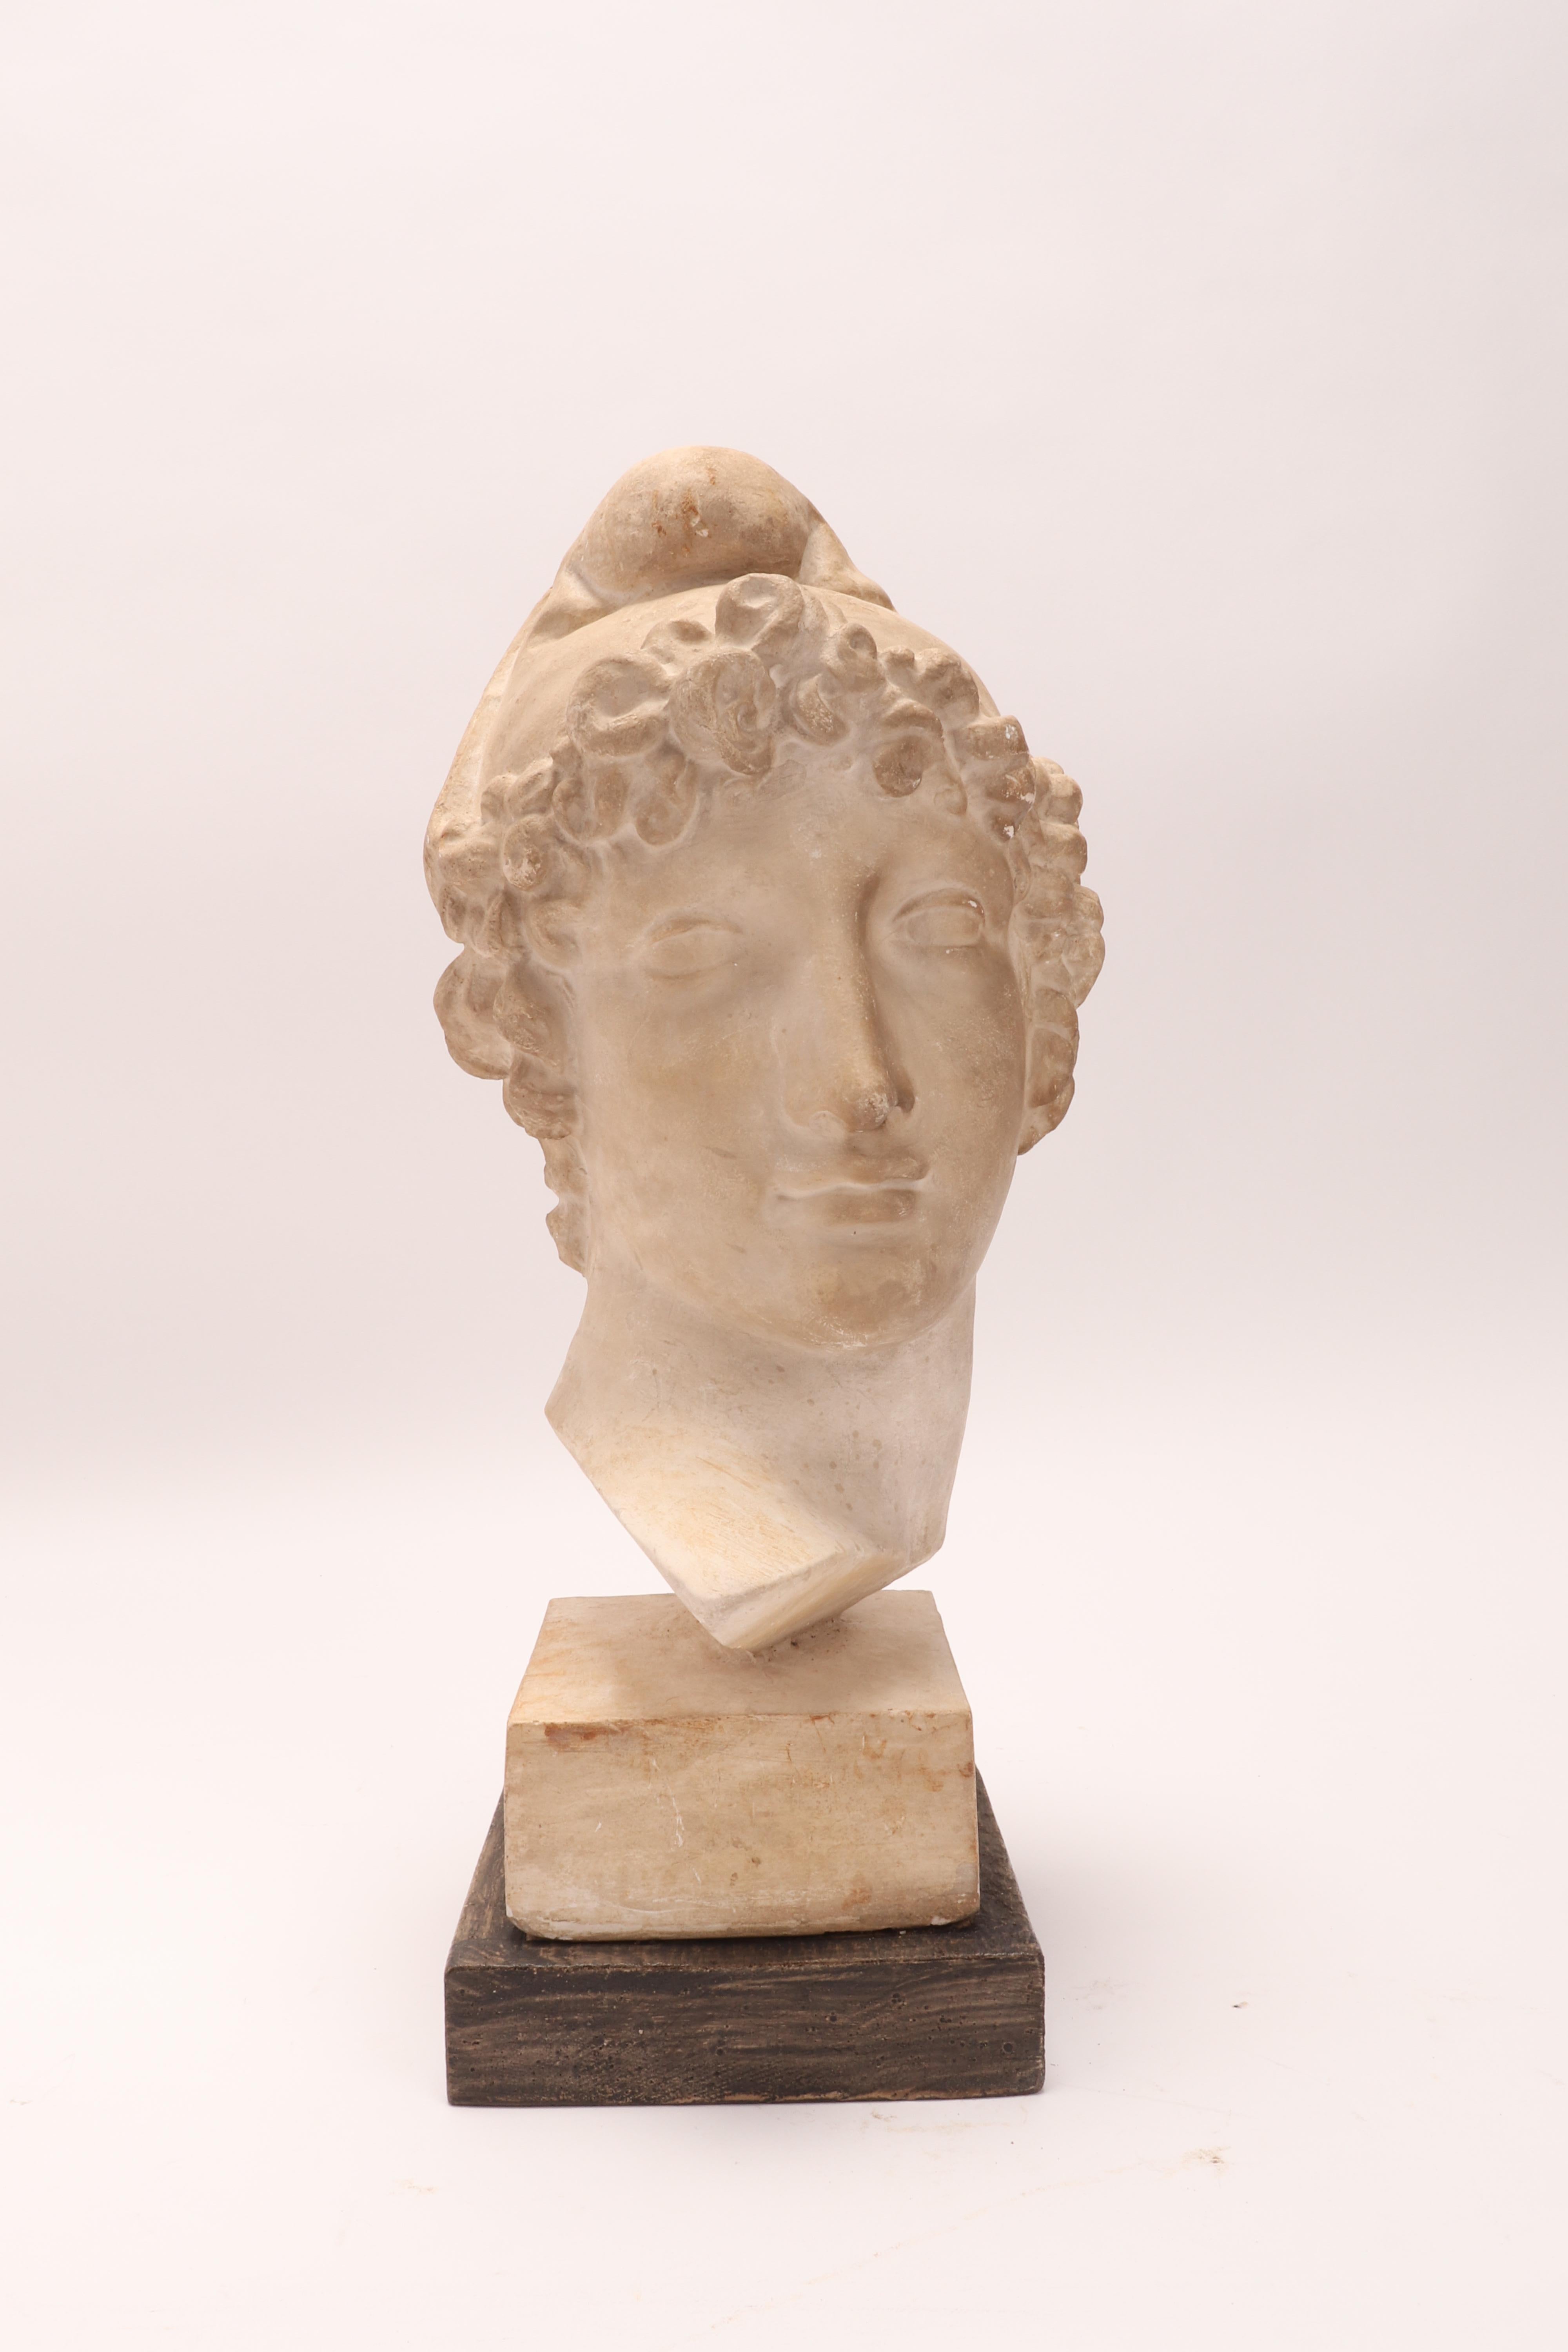 Over the wooden black painted base is set the plaster cast of the head of Paride, da Antonio Canova. The cast for drawing teaching in Academy, Italy, circa 1890.